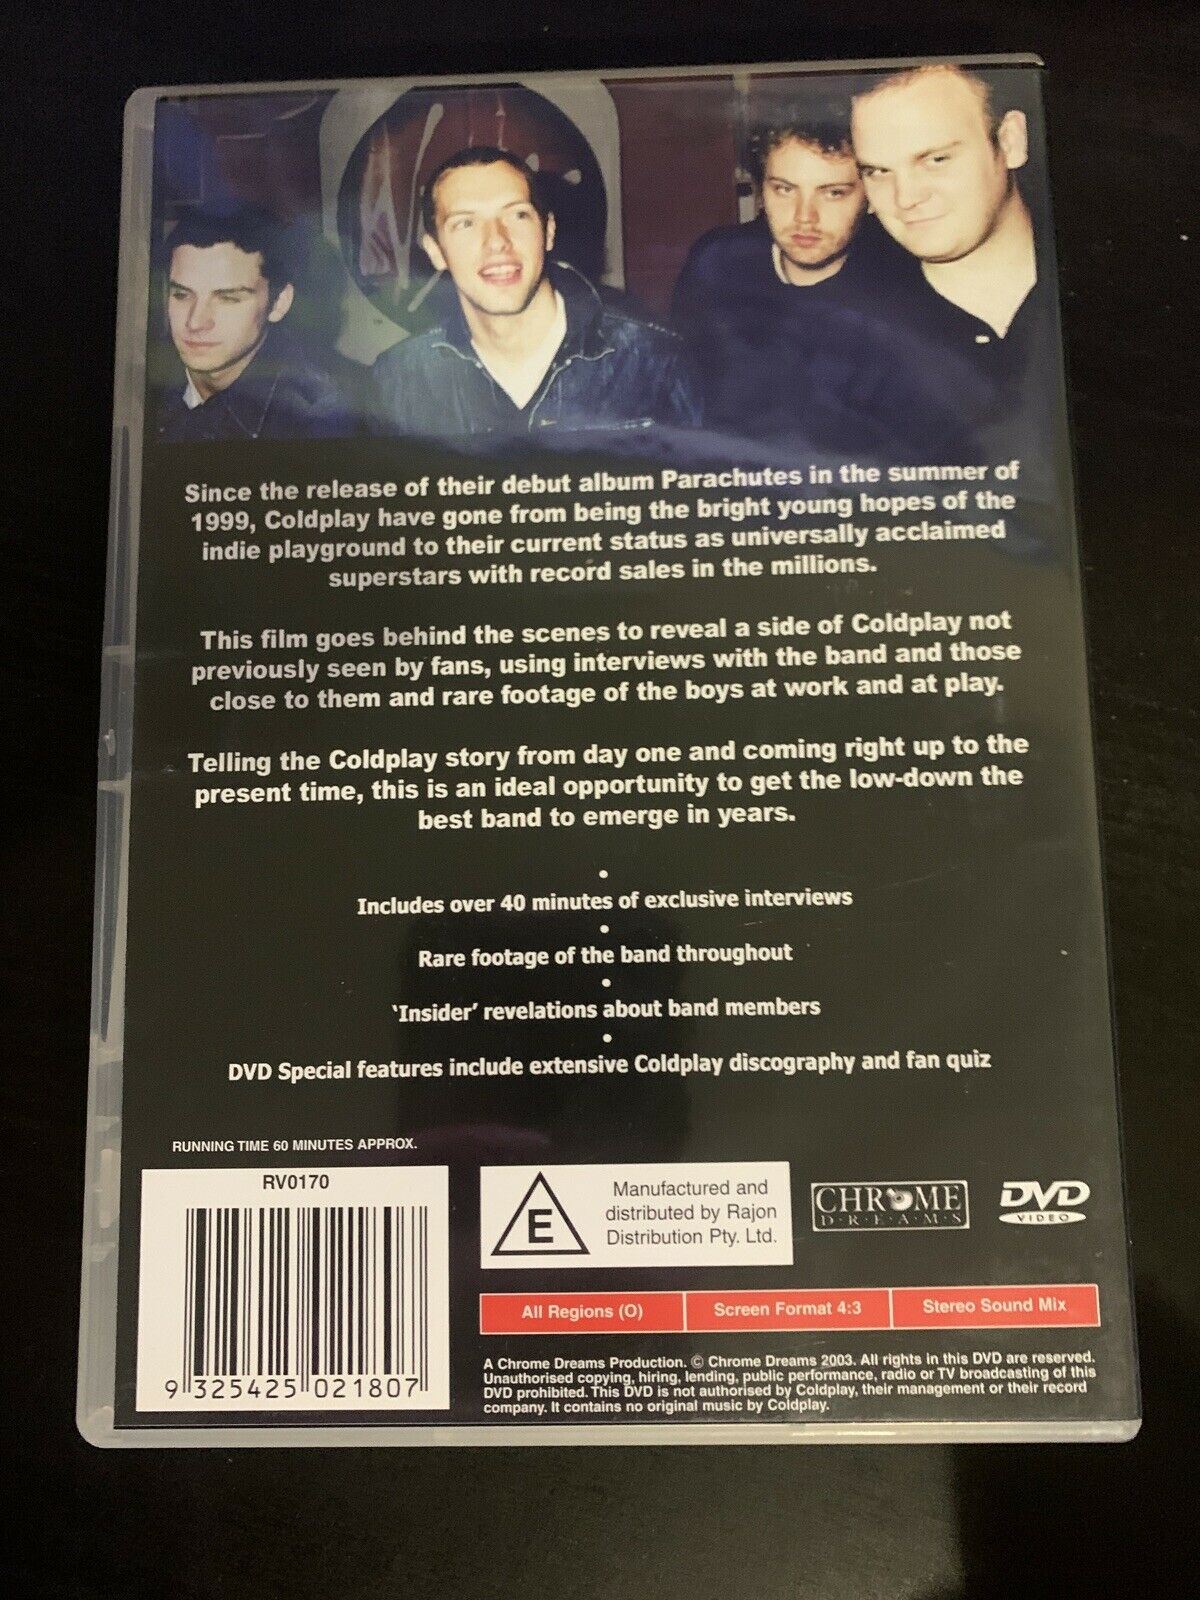 Coldplay - Back To The Start (DVD, 2003) Interviews & Rare Footage. All Regions